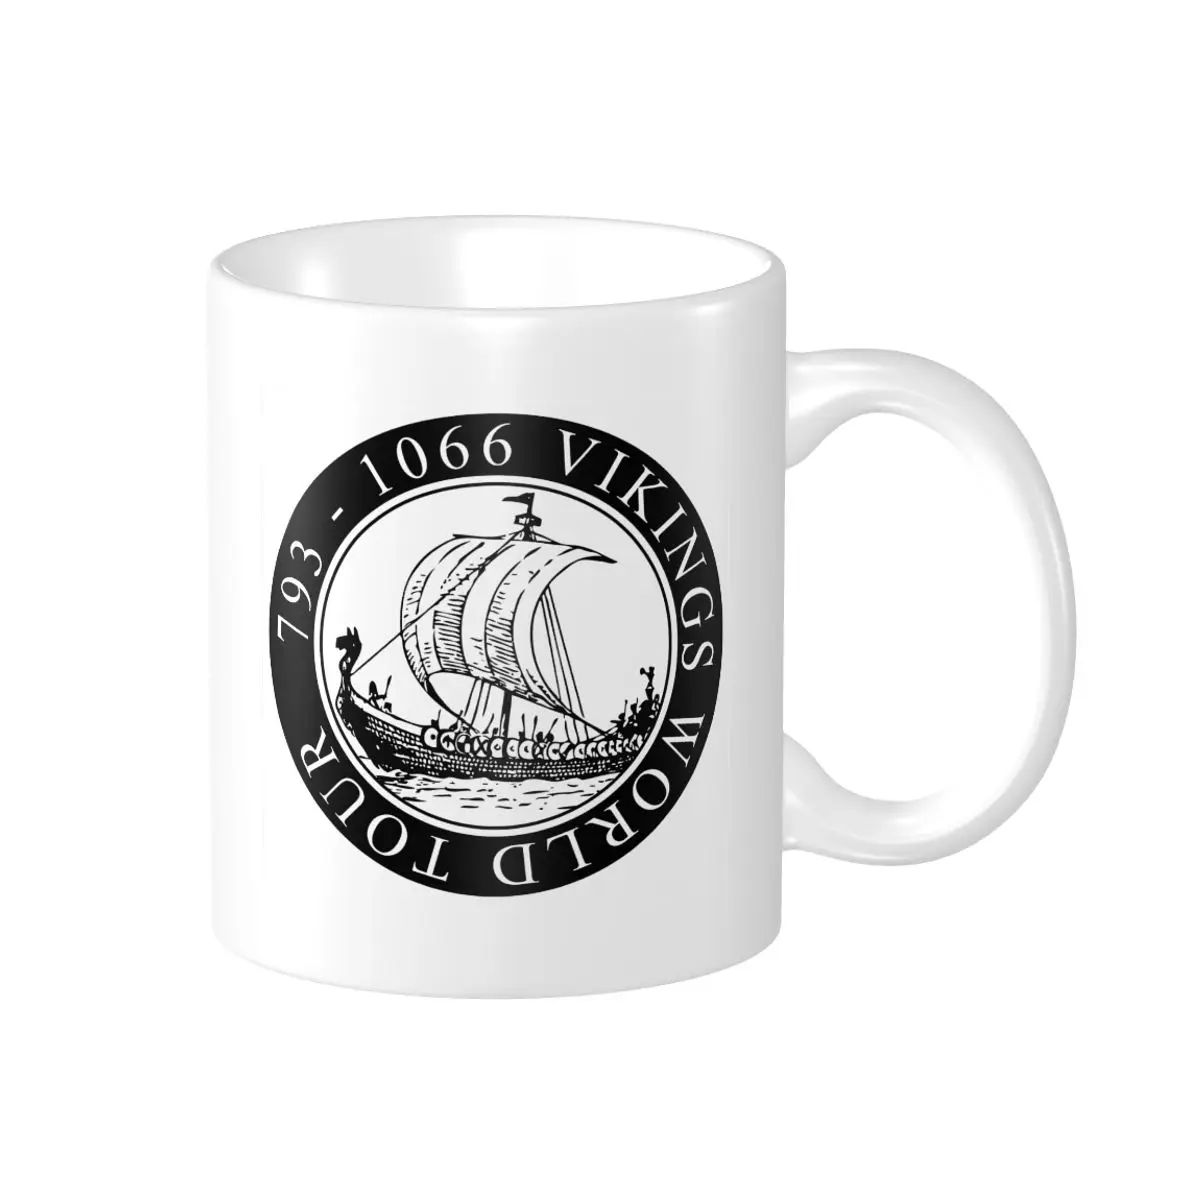 

Promo Vikings World Tour Wikinger Vikings Mugs Graphic Cups CUPS Print Sarcastic R339 coffee cups